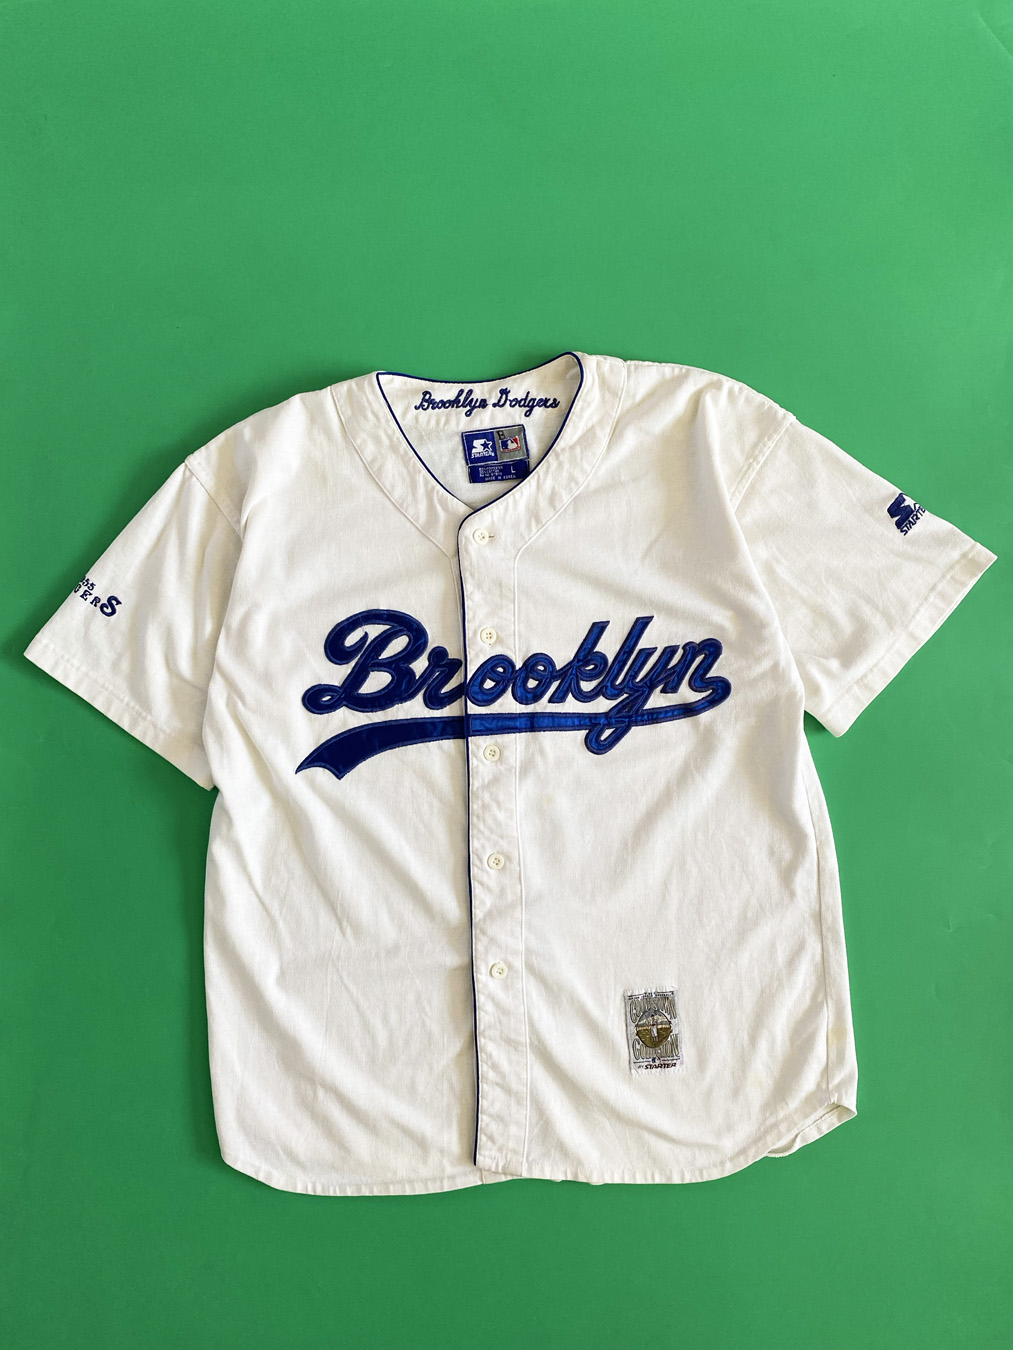 dodgers jersey throwback